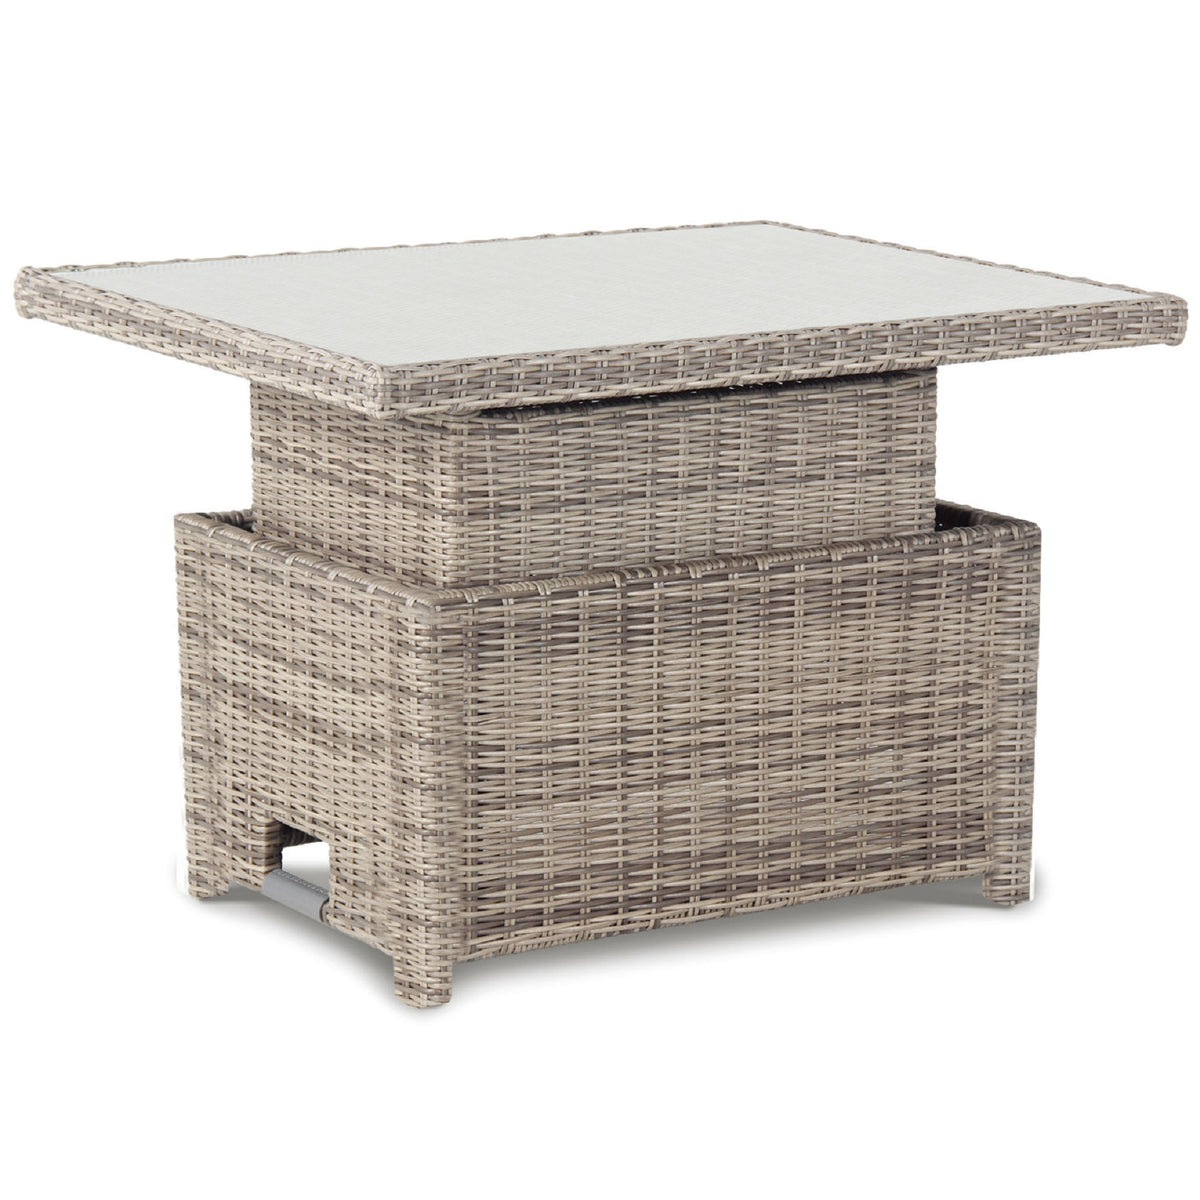 Kettler Palma Signature Mini Oyster Wicker High Low Adjustable Glass Top Table